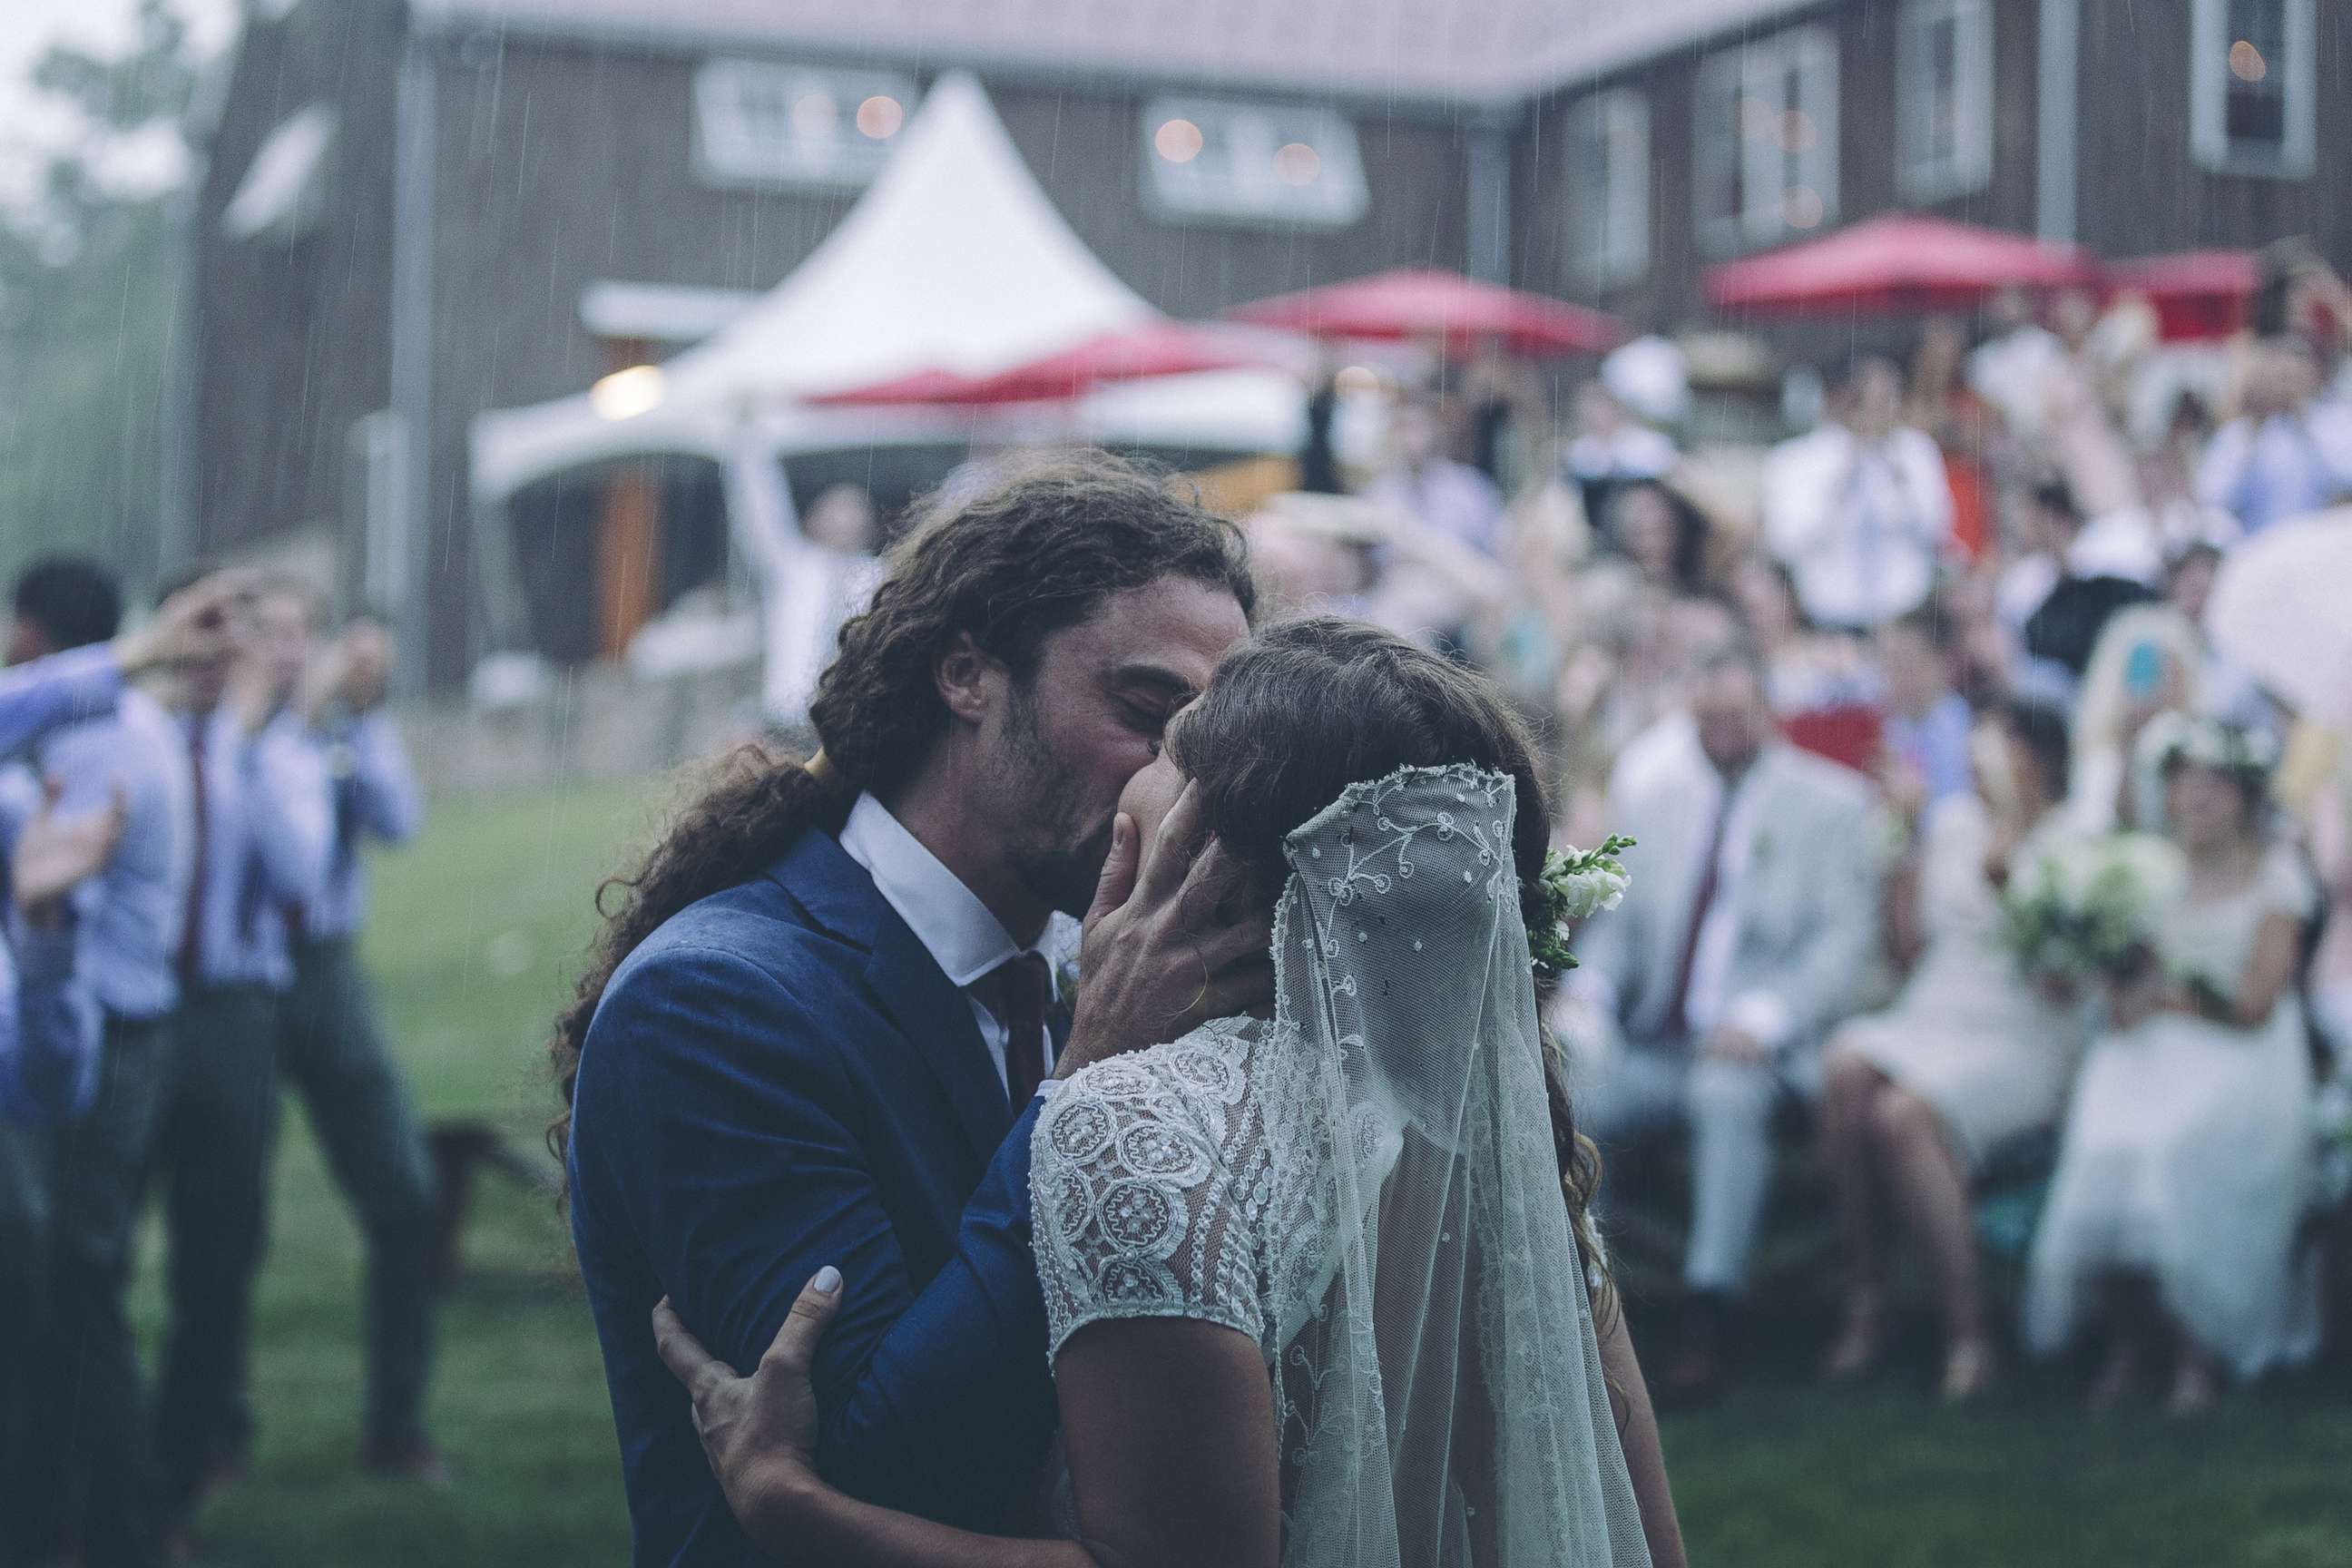 PHOTO: Luke and Kathleen O'Brien made a music video during their wedding set to Luke's song, "Old Love."